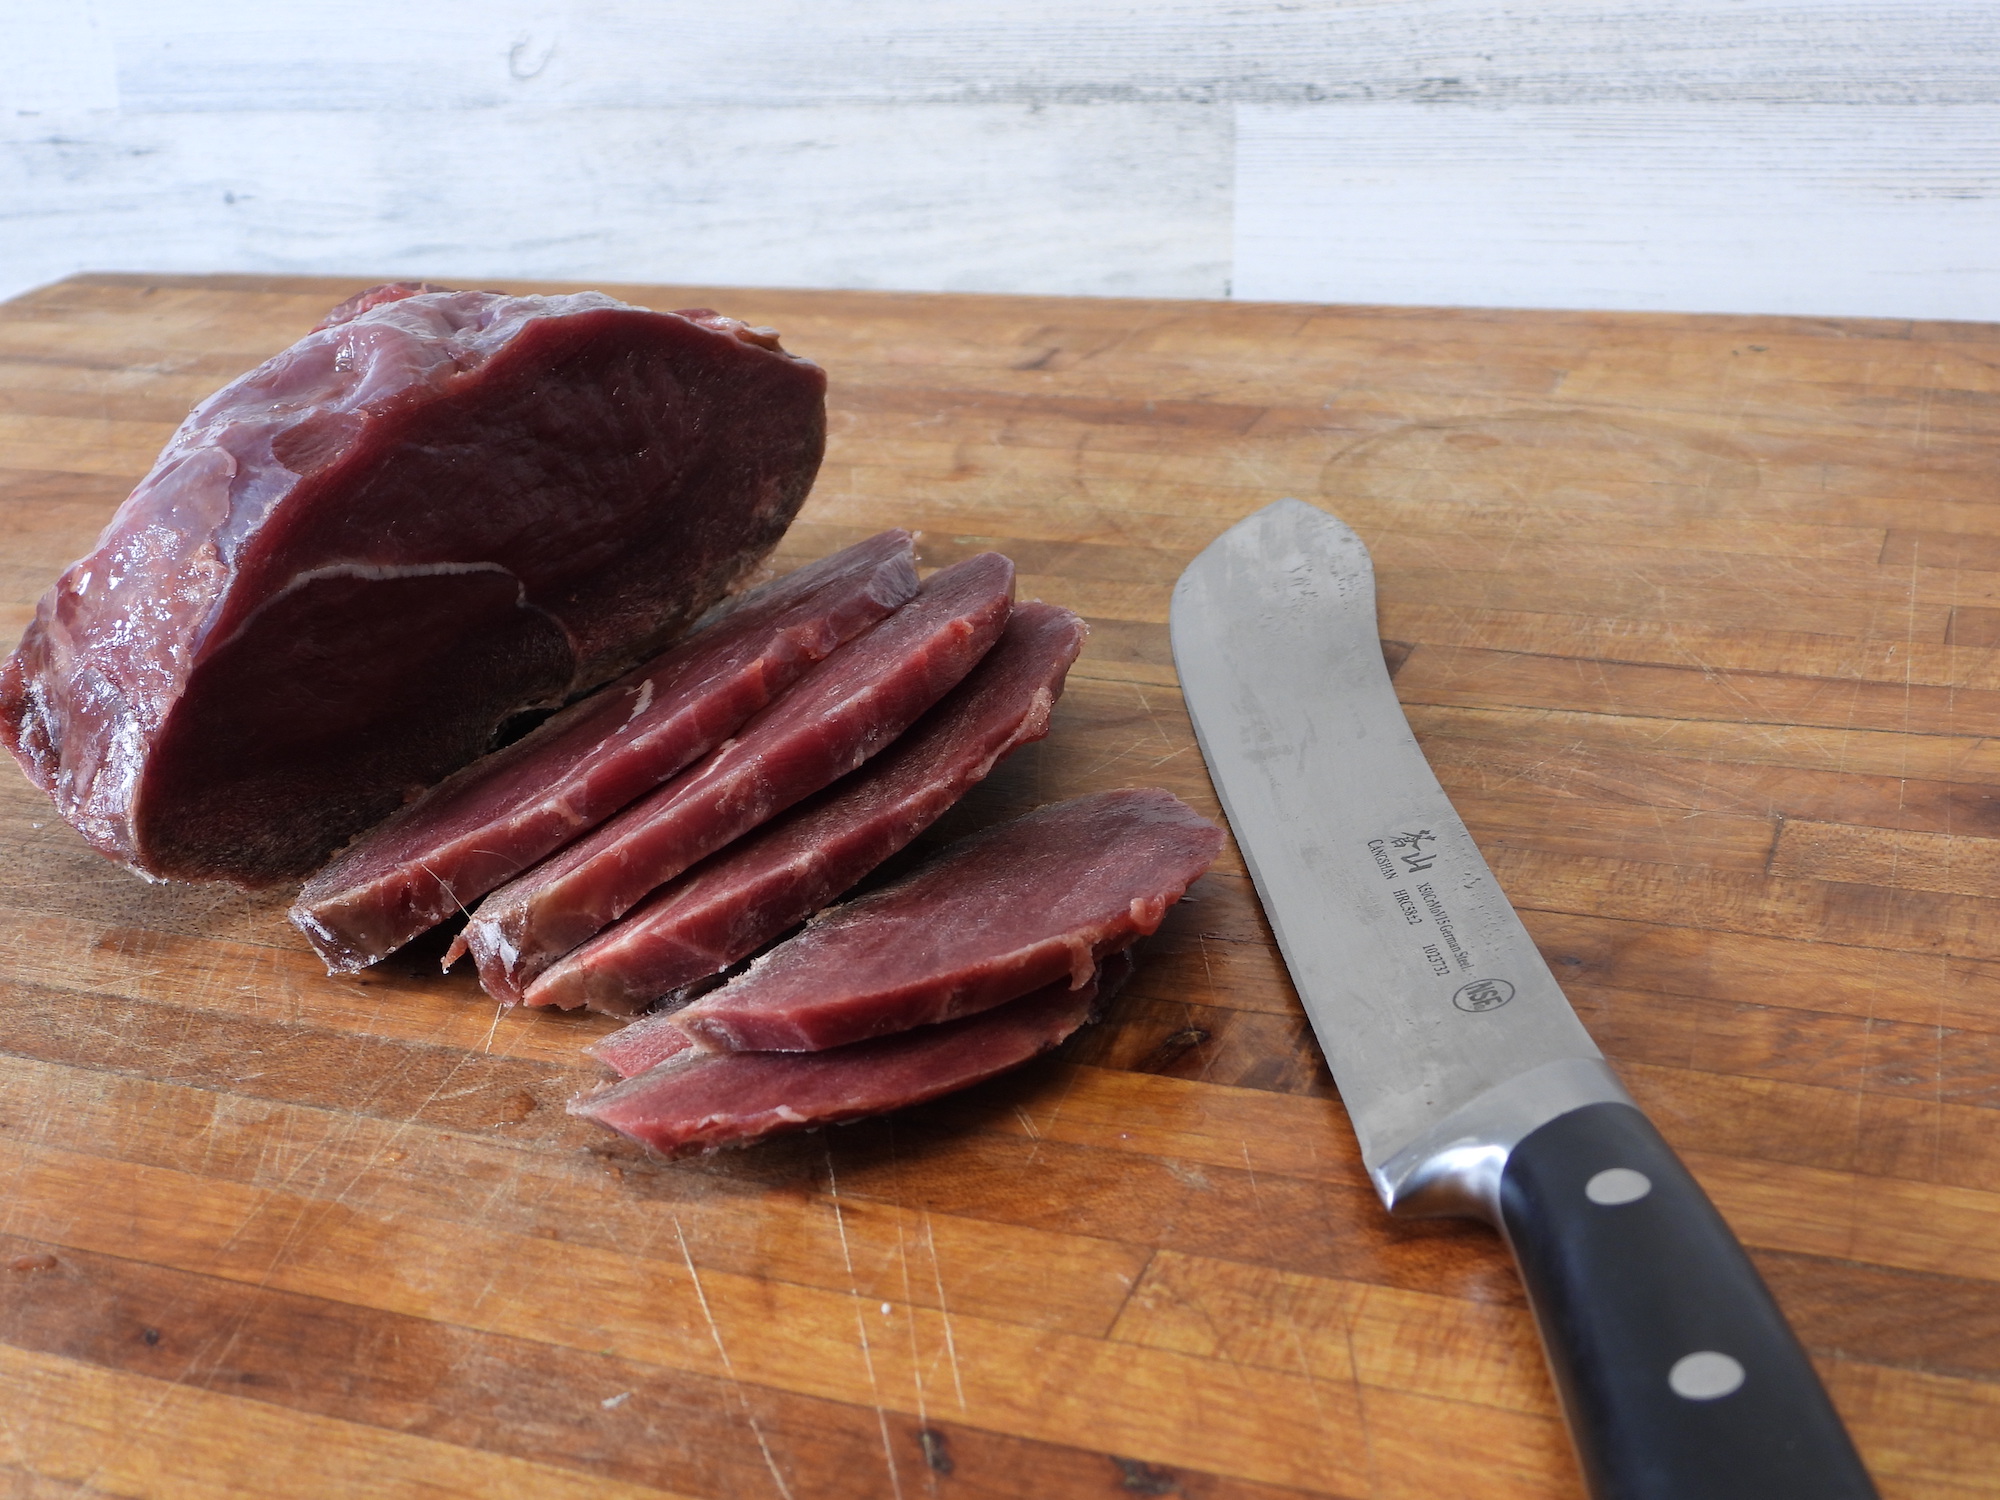 Slices of raw meat on a wooden cutting board next to a knife